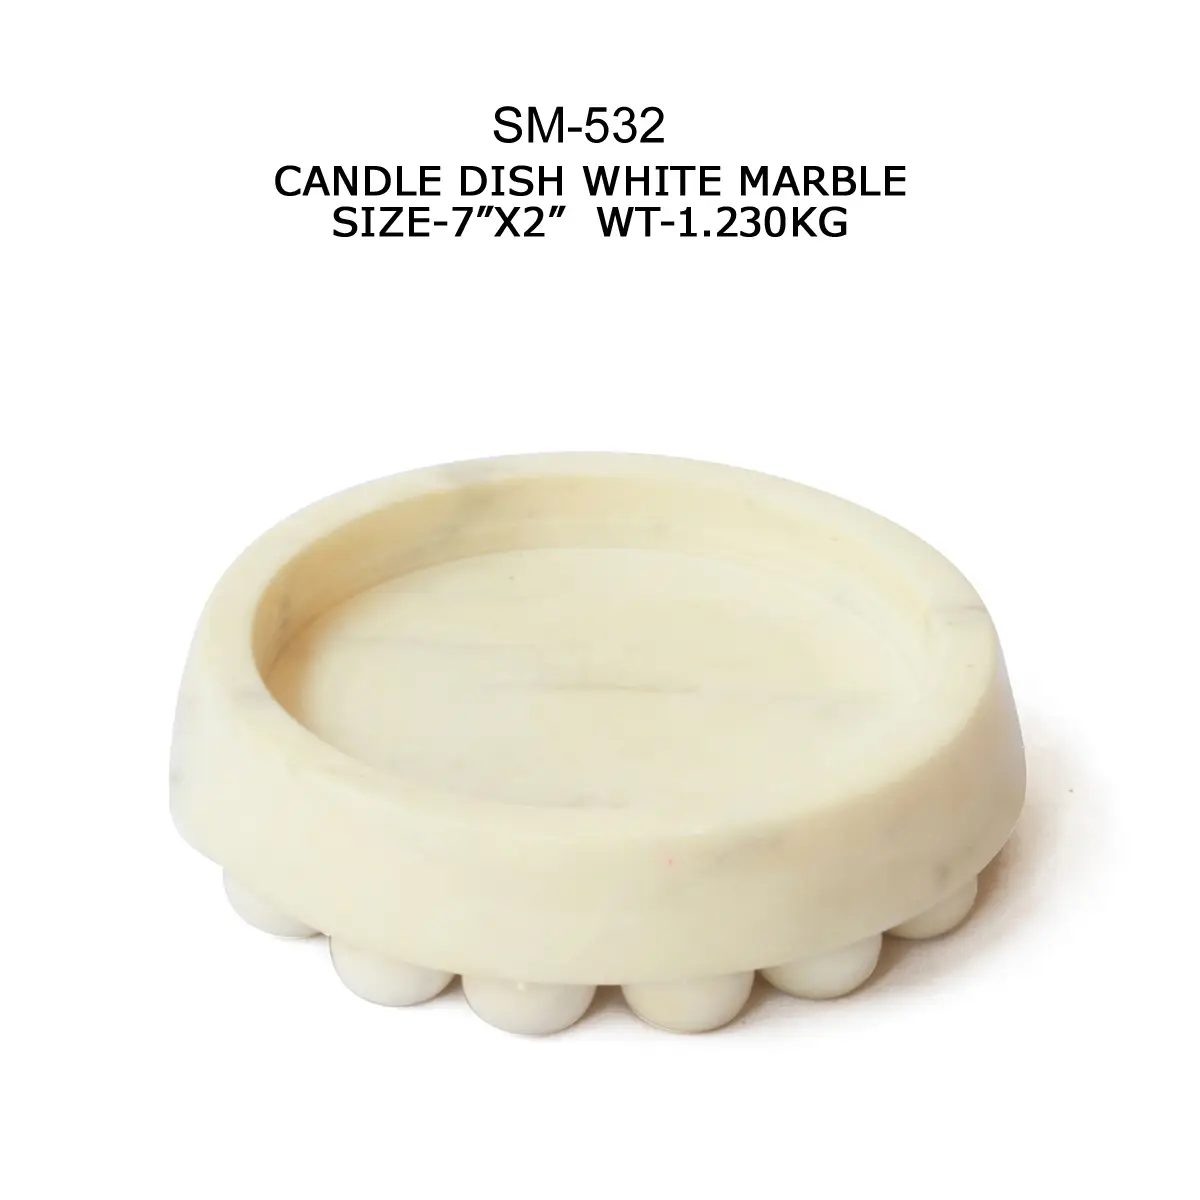 CANDLE DISH WHITE MARBLE